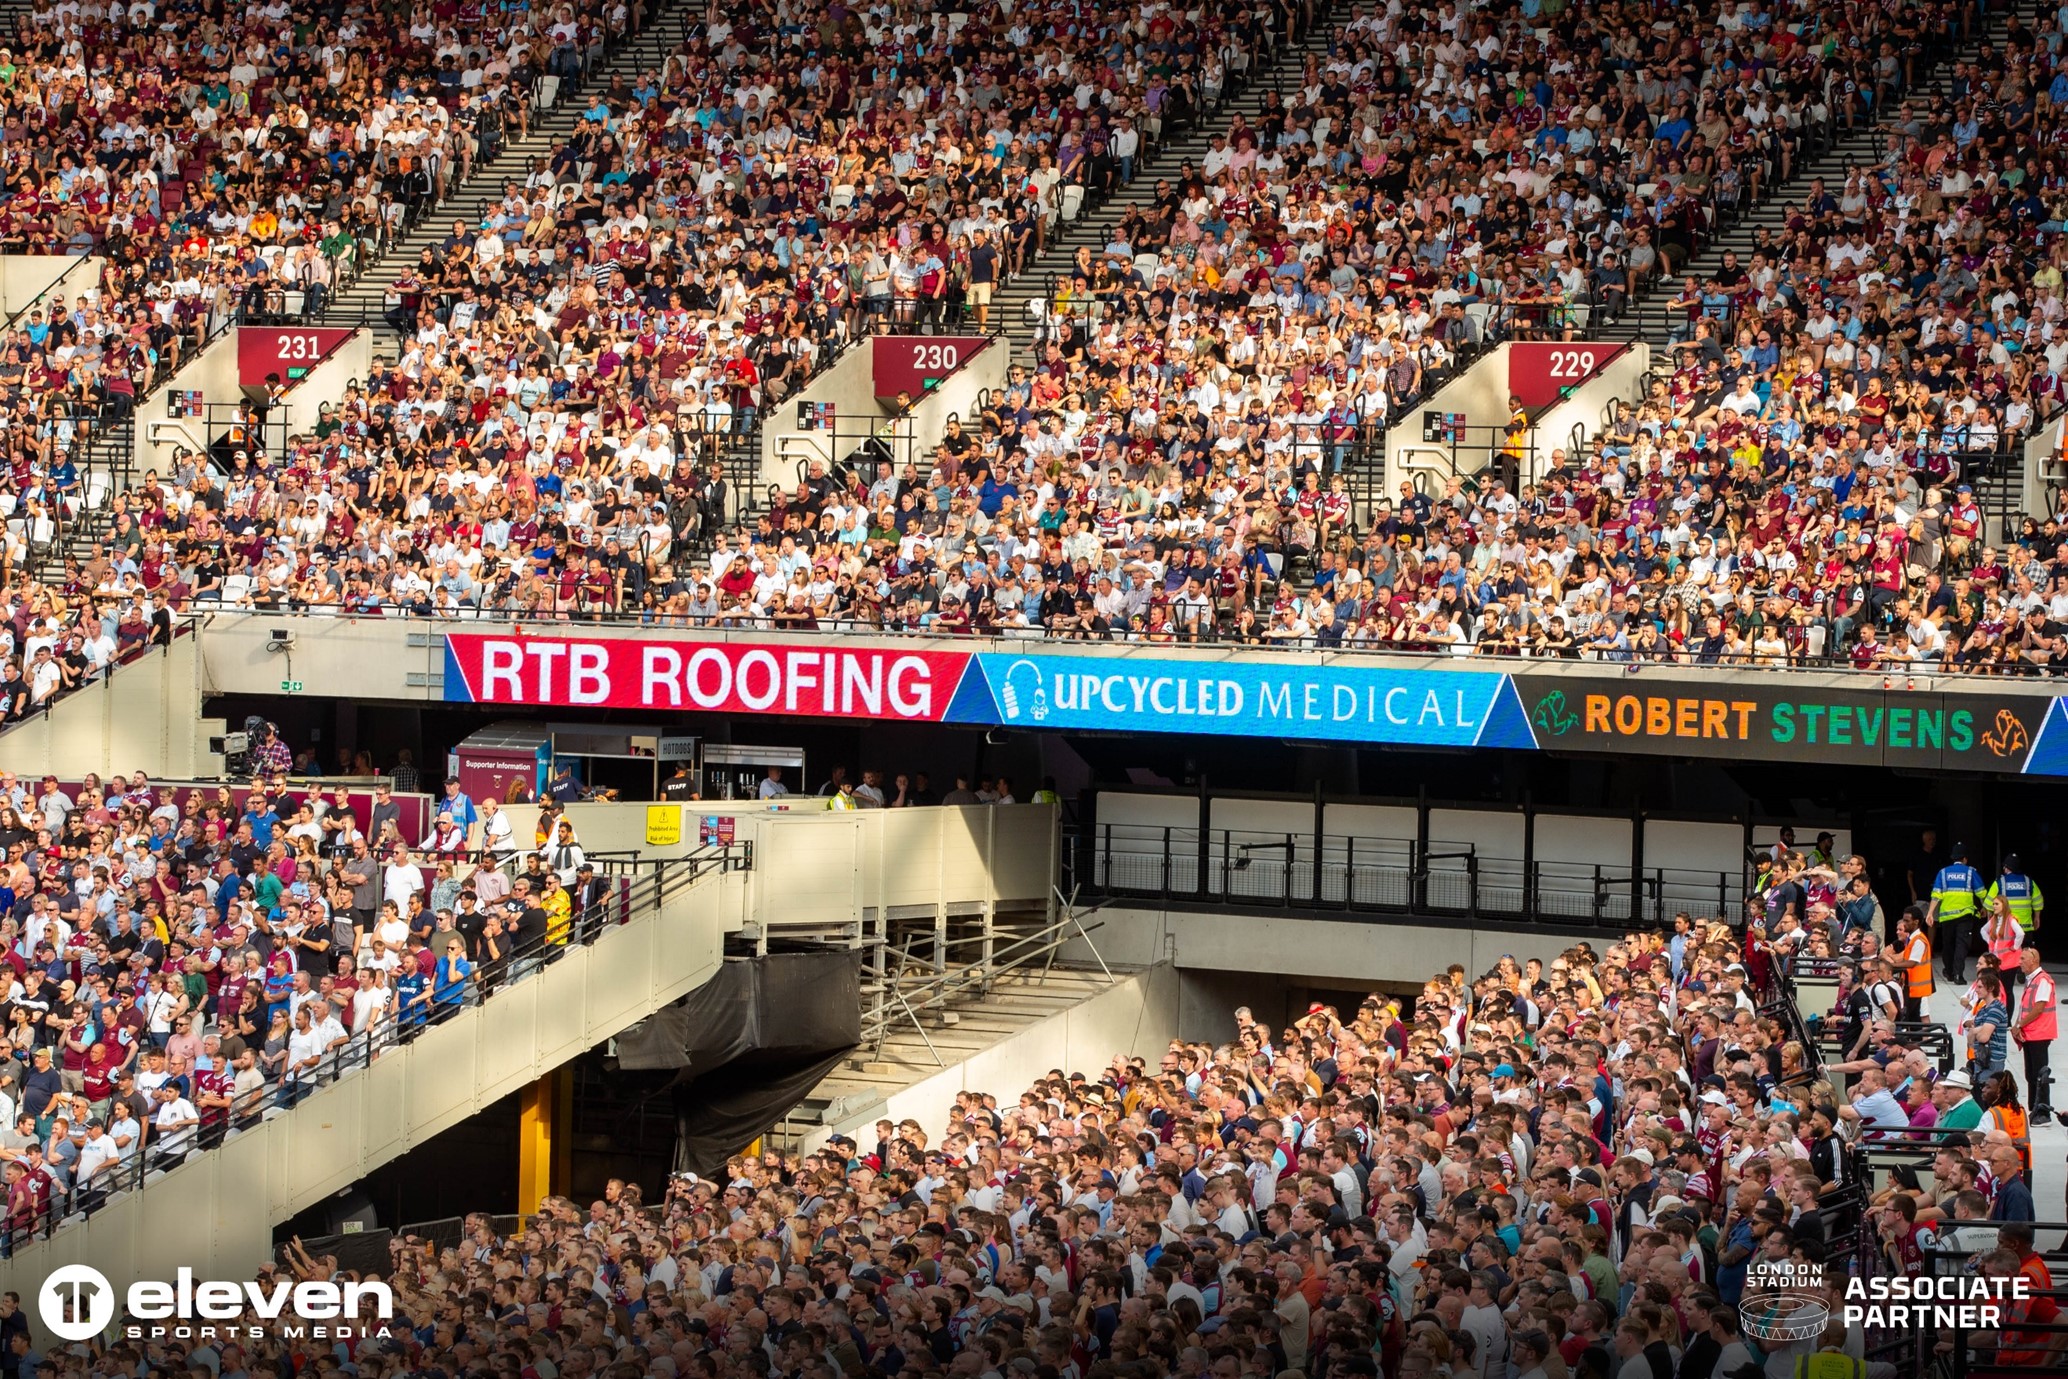 RTB Roofing Extends Associate Partnership with London Stadium